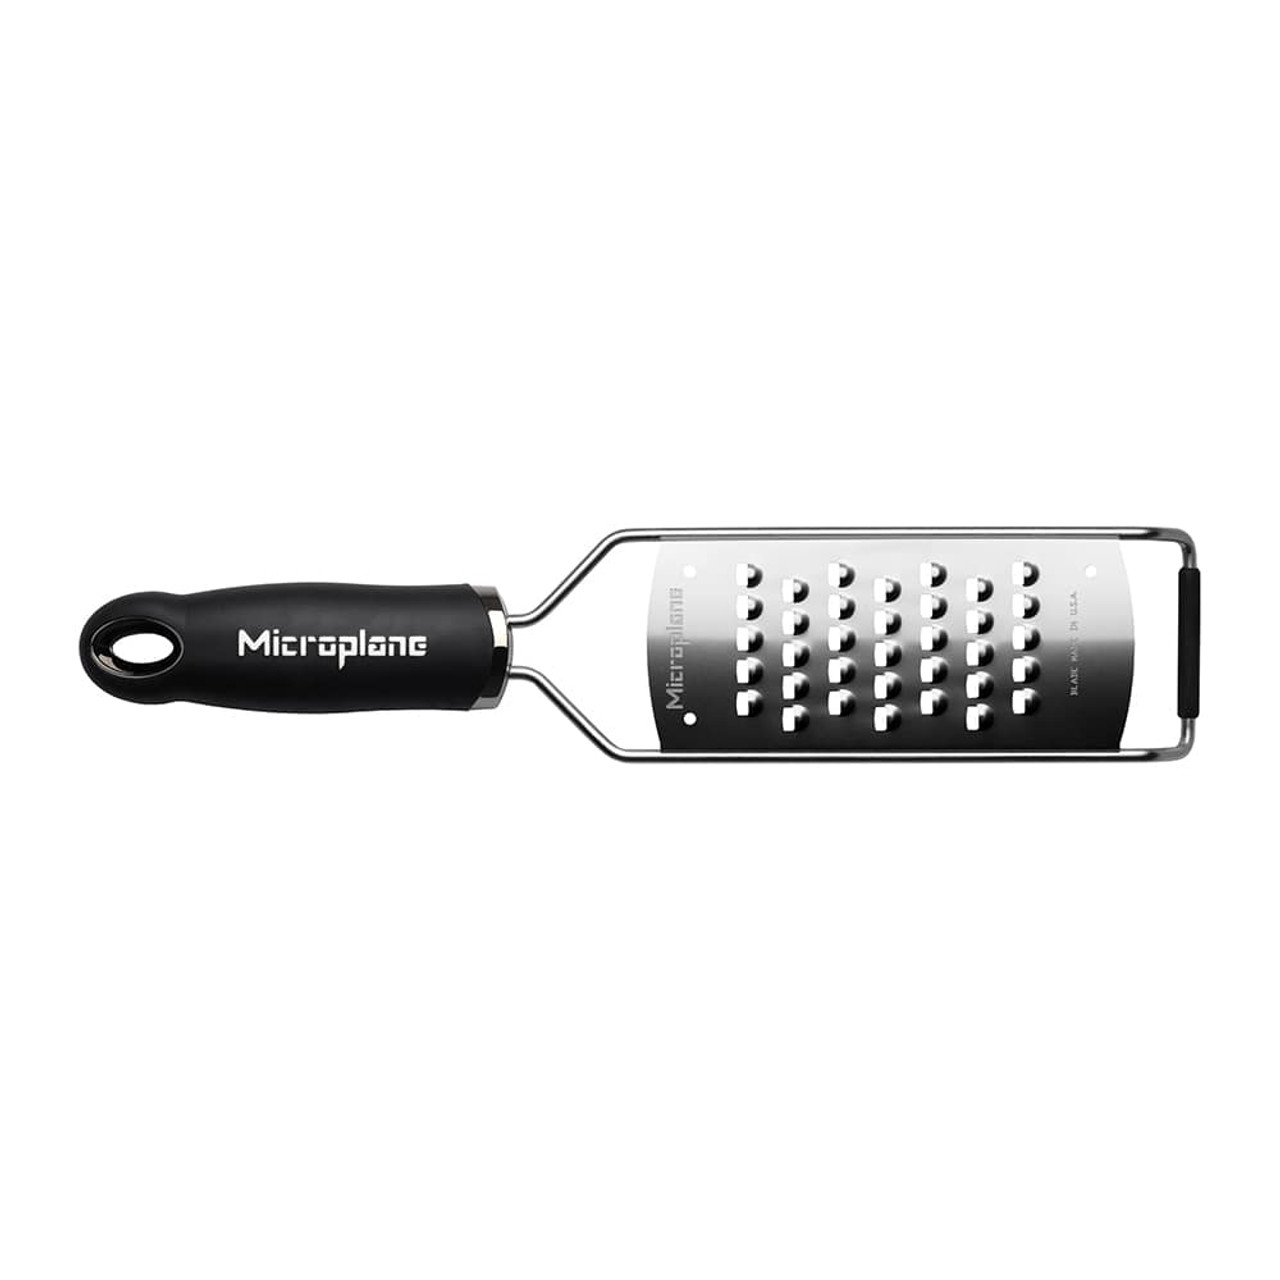 https://cdn11.bigcommerce.com/s-hccytny0od/images/stencil/1280x1280/products/1209/2851/microplane-gourmet-series-extra-coarse-grater__33145.1589999638.jpg?c=2?imbypass=on